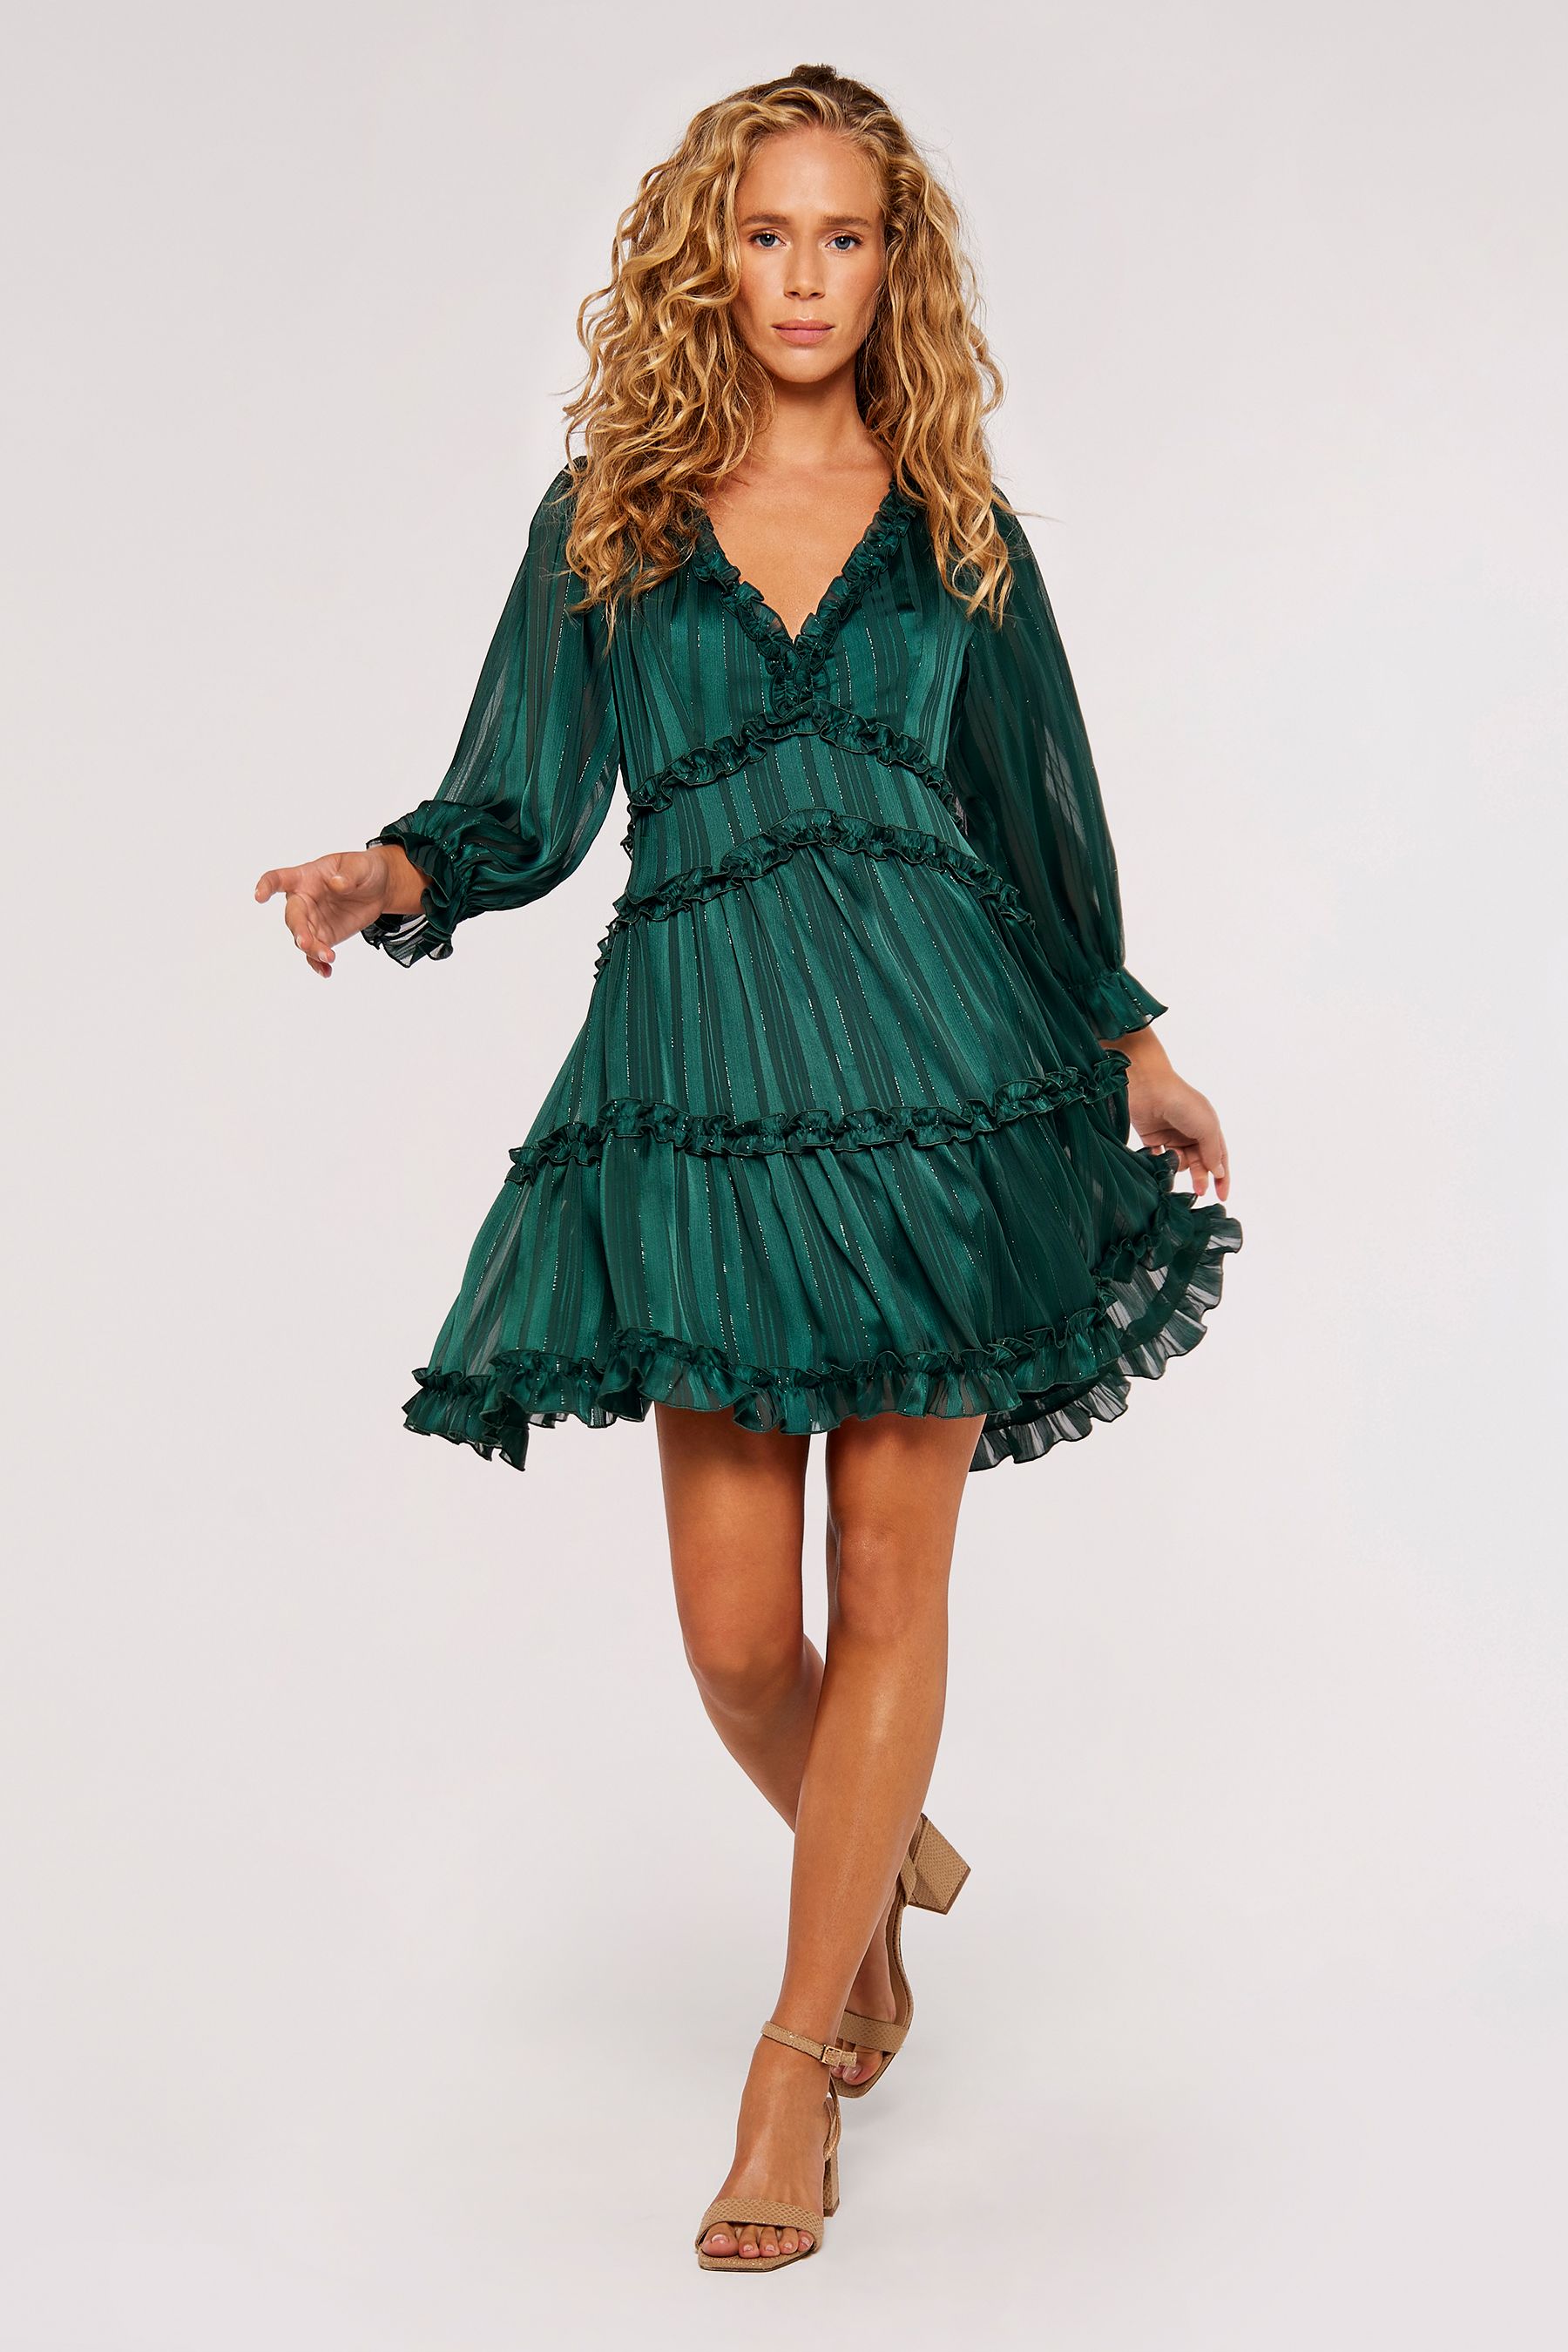 Buy Apricot Green Ruffle Tiered Dress from the Next UK online shop